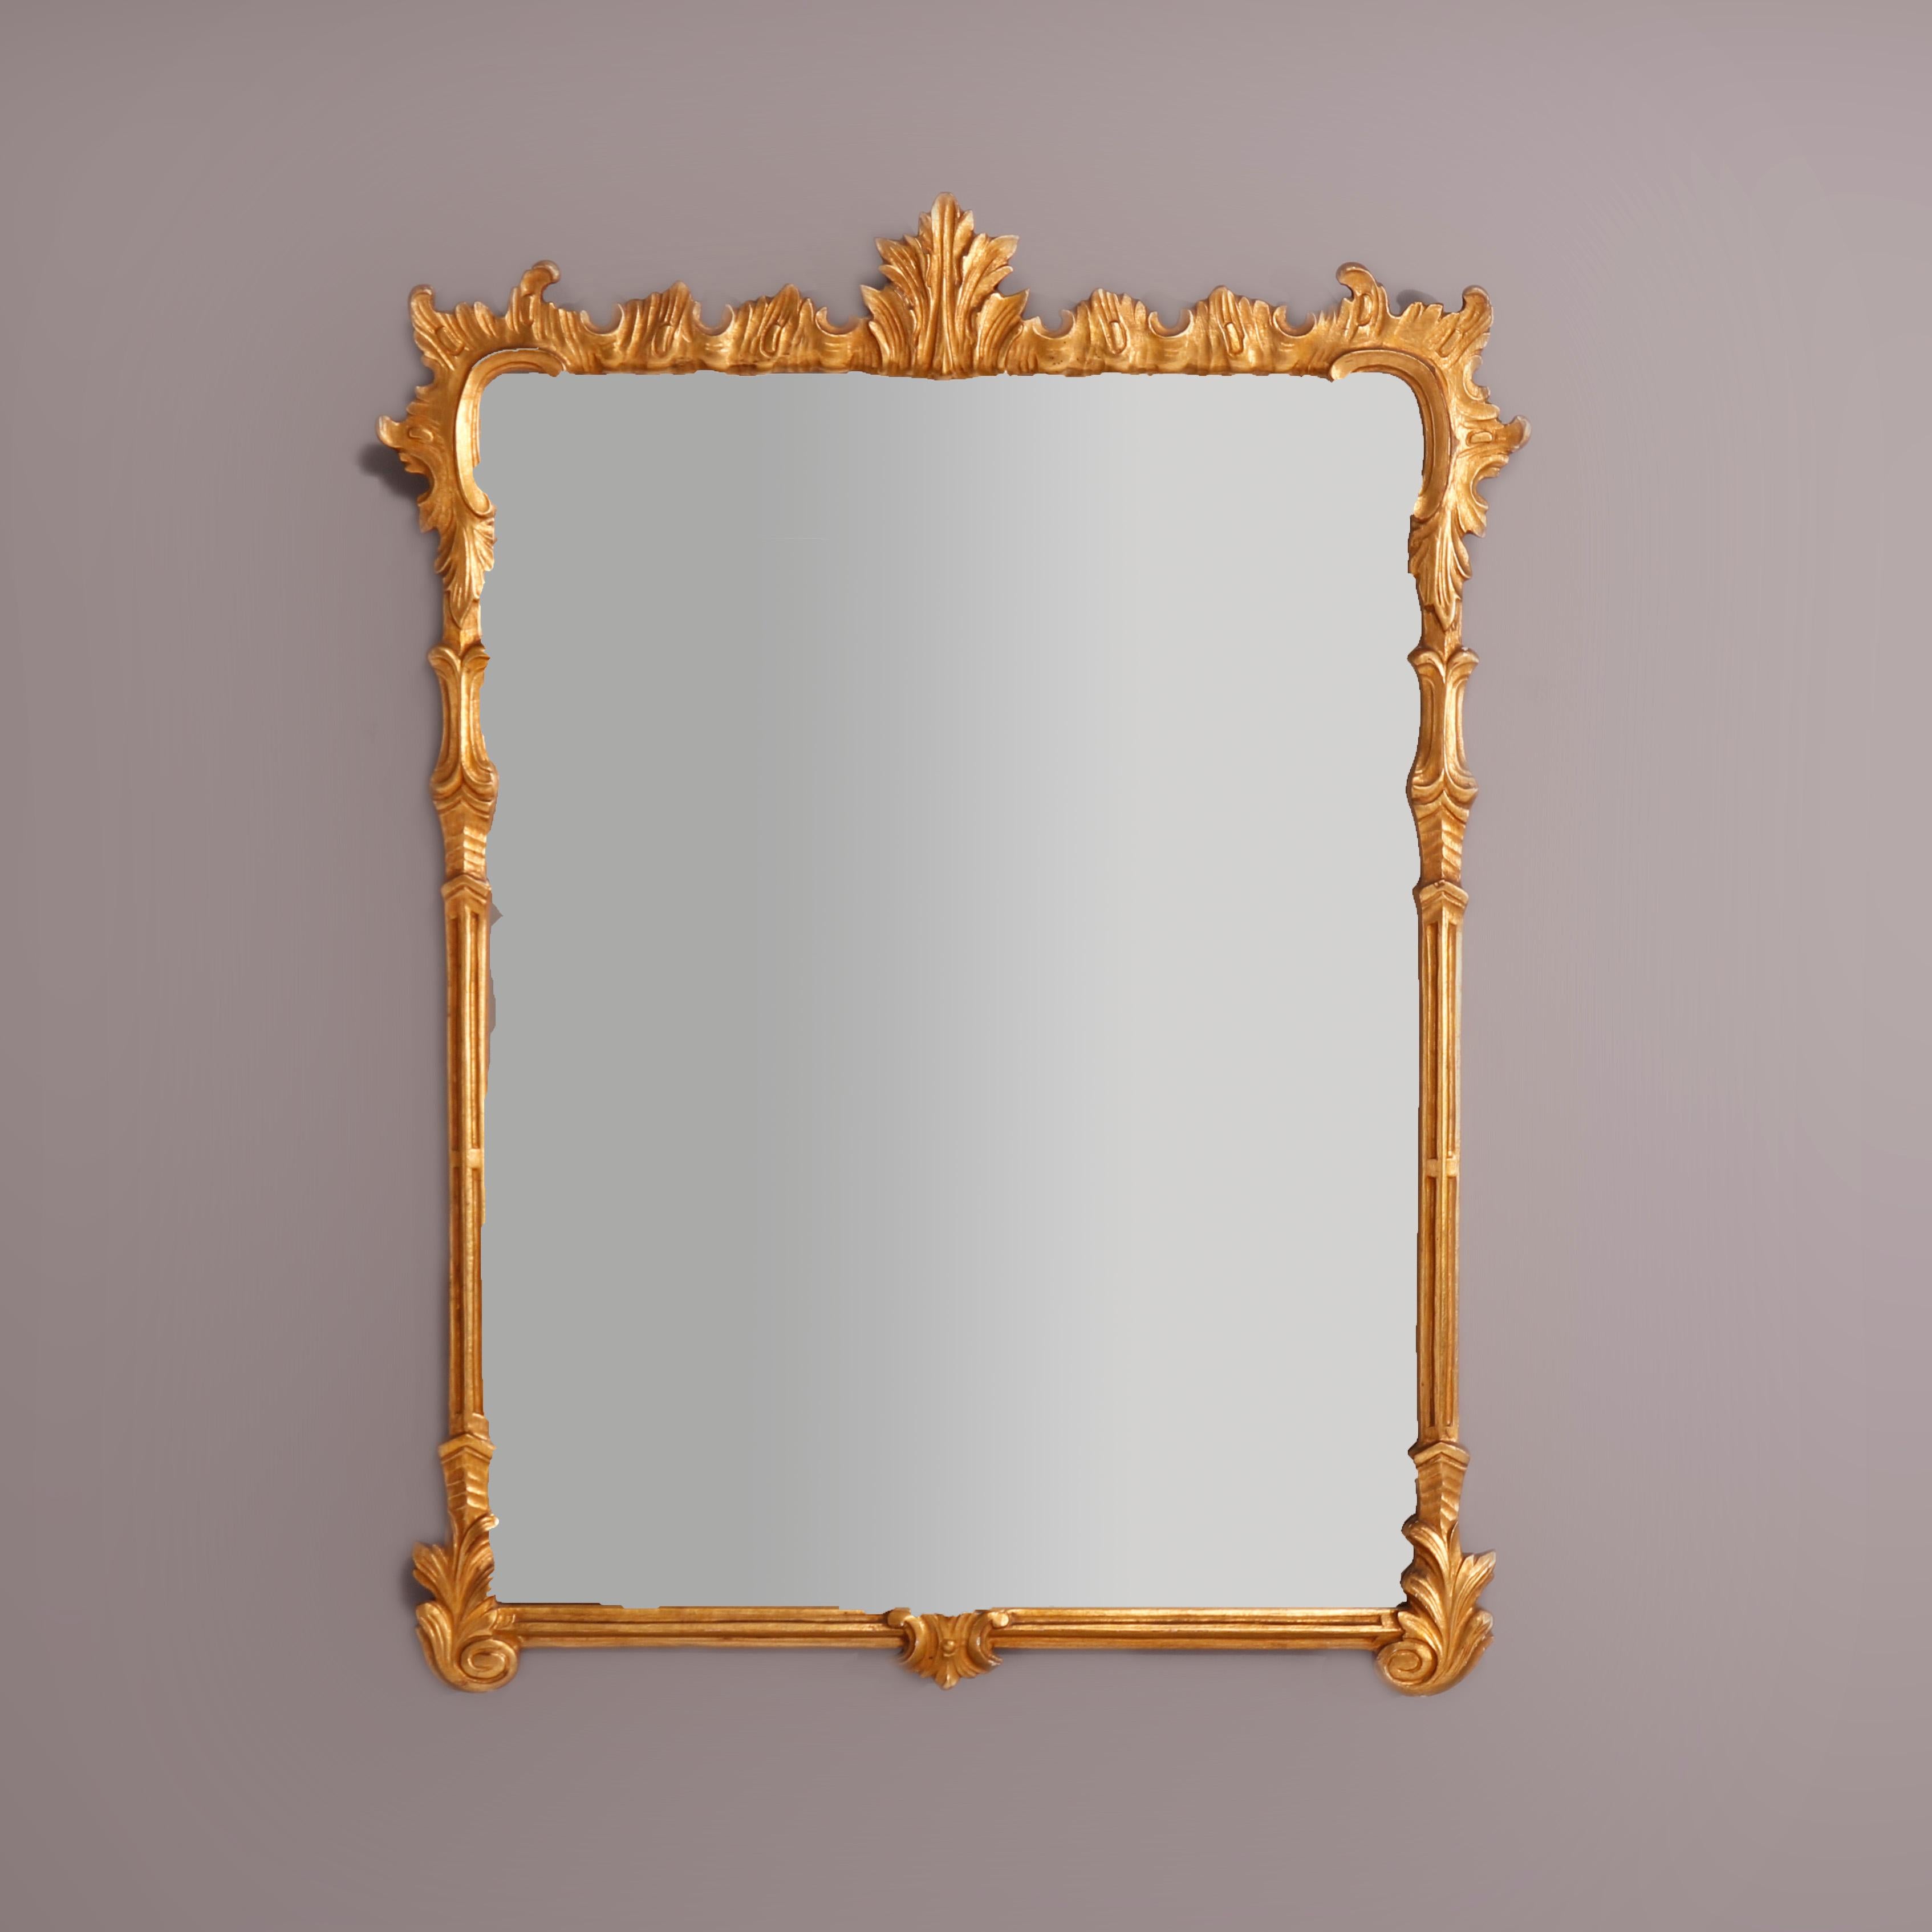 An antique French Louis XVI style wall mirror offers giltwood frame with foliate finial and elements throughout, maker label en verso as photographed, c1930

Measures - 40.75''H X 30.75''W X 1.5''D (overall) and 33.5